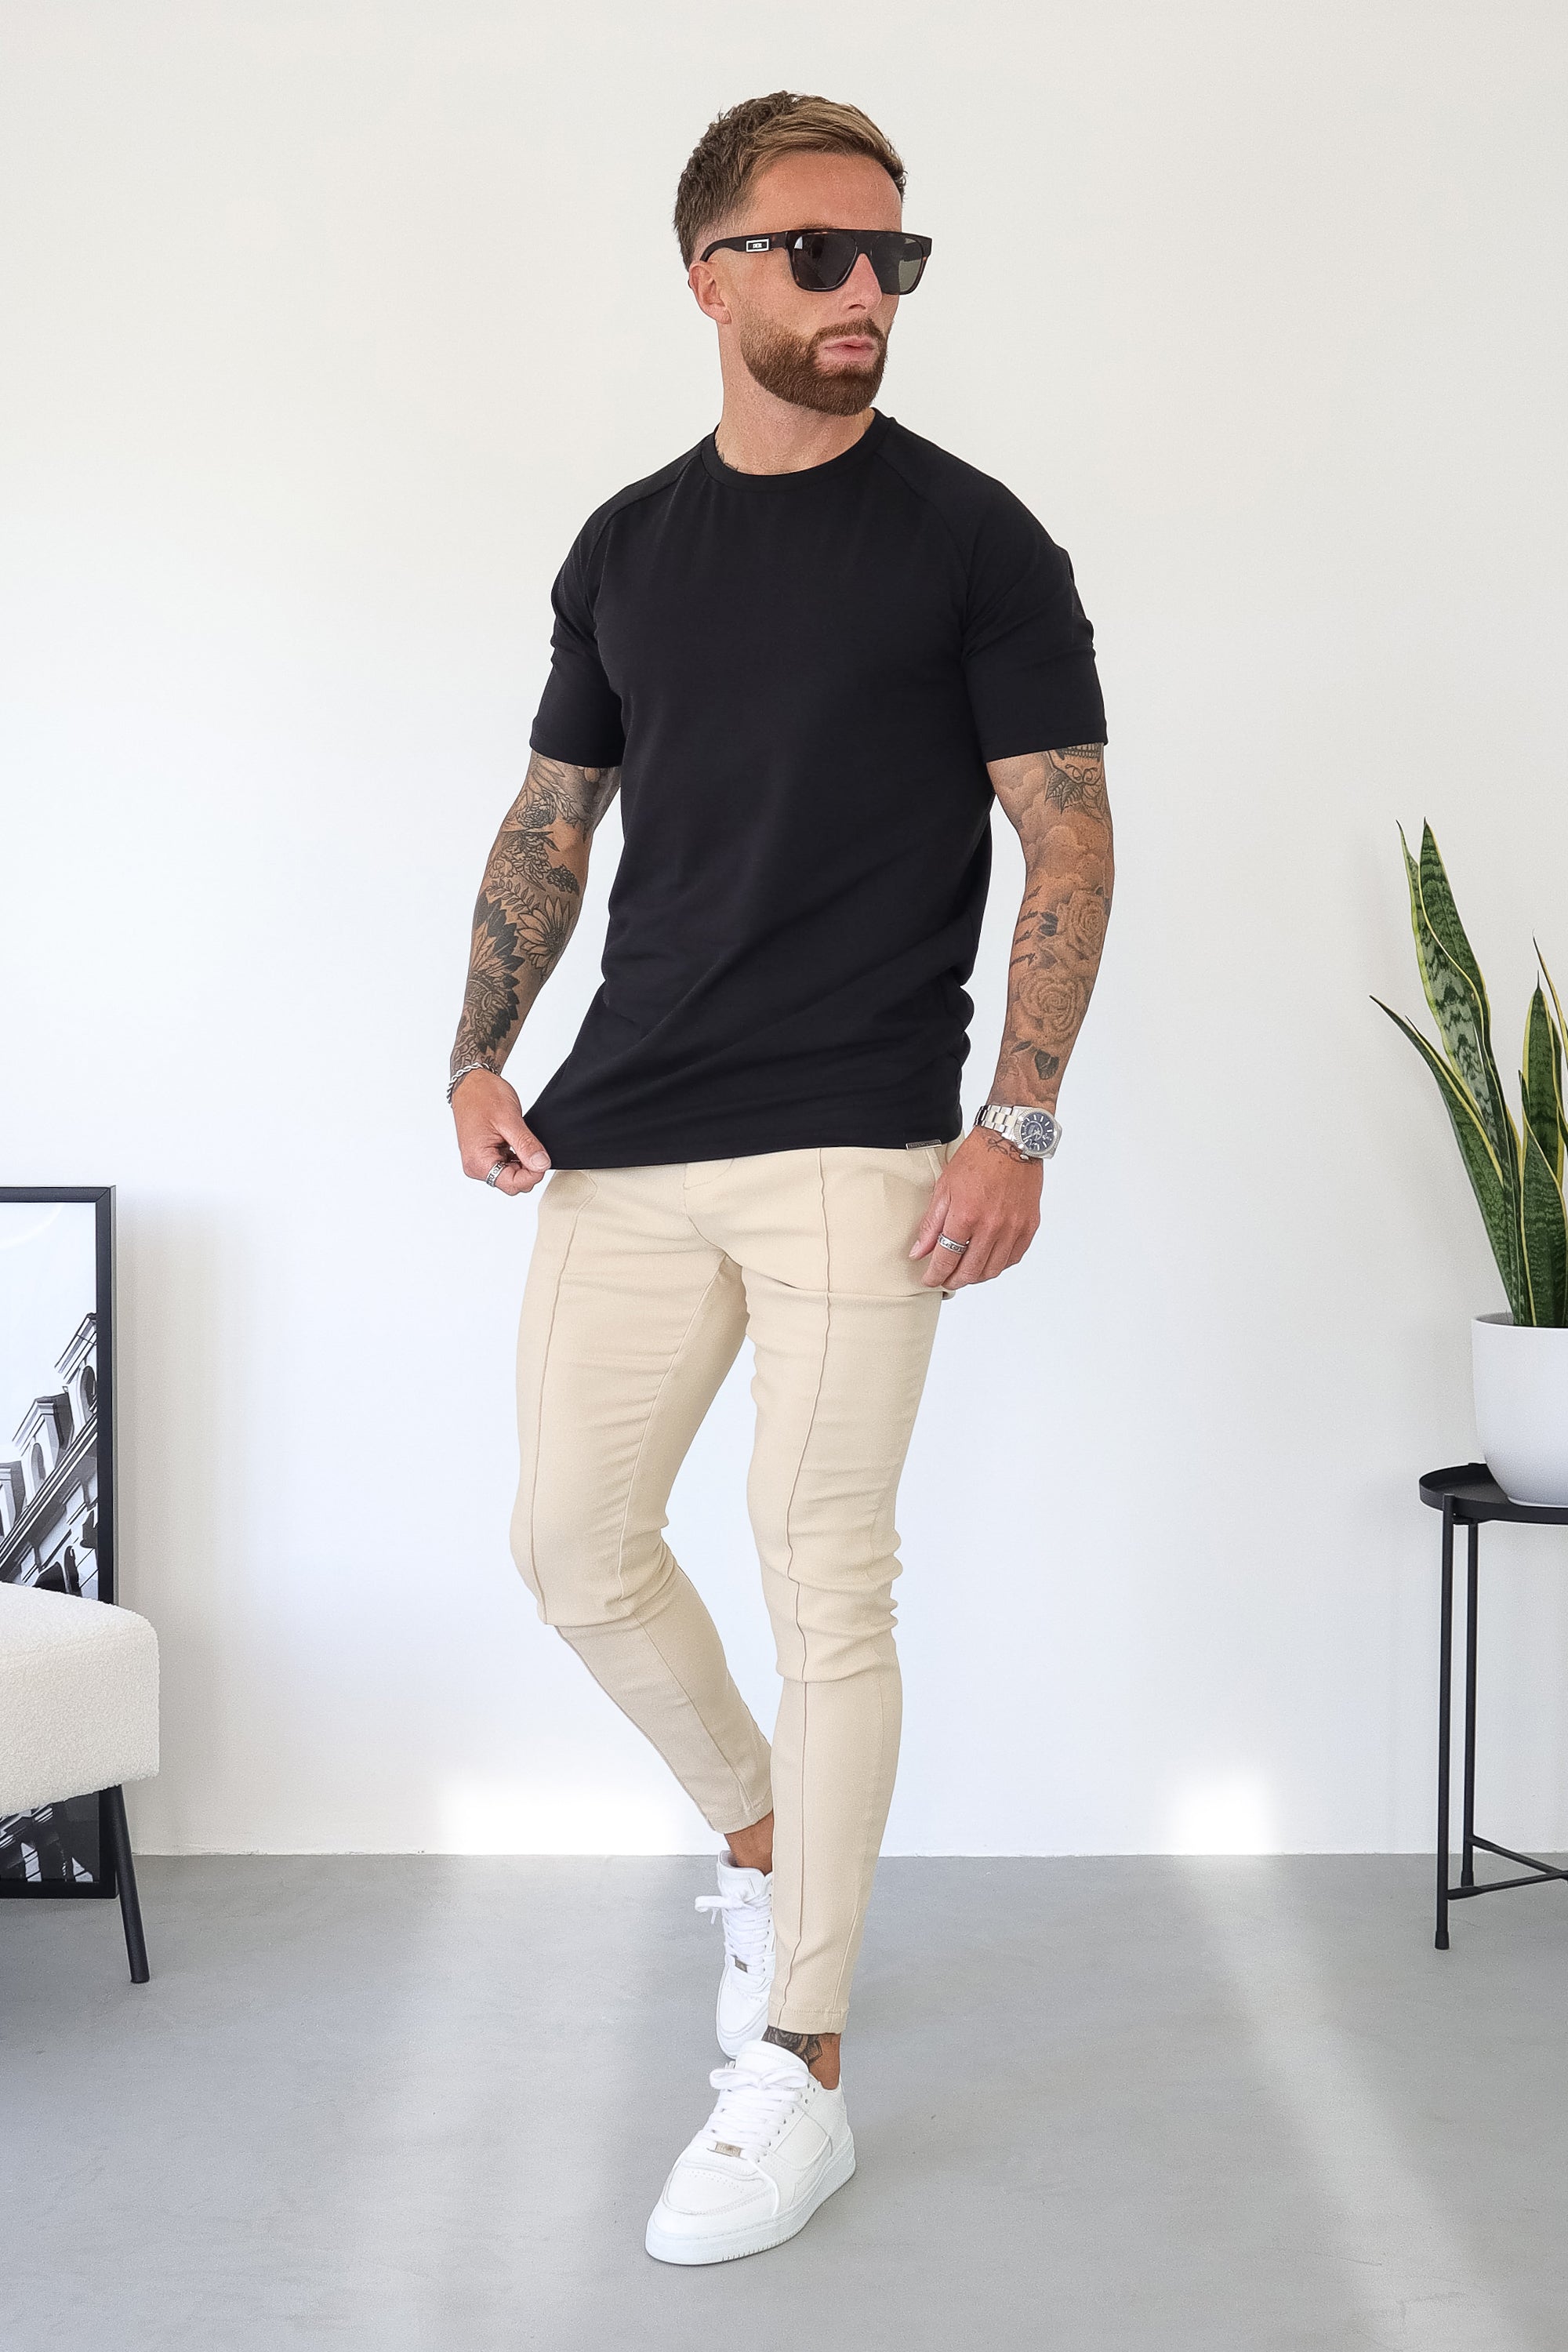 THE MUSCLE BASIC T-SHIRT - BLACK